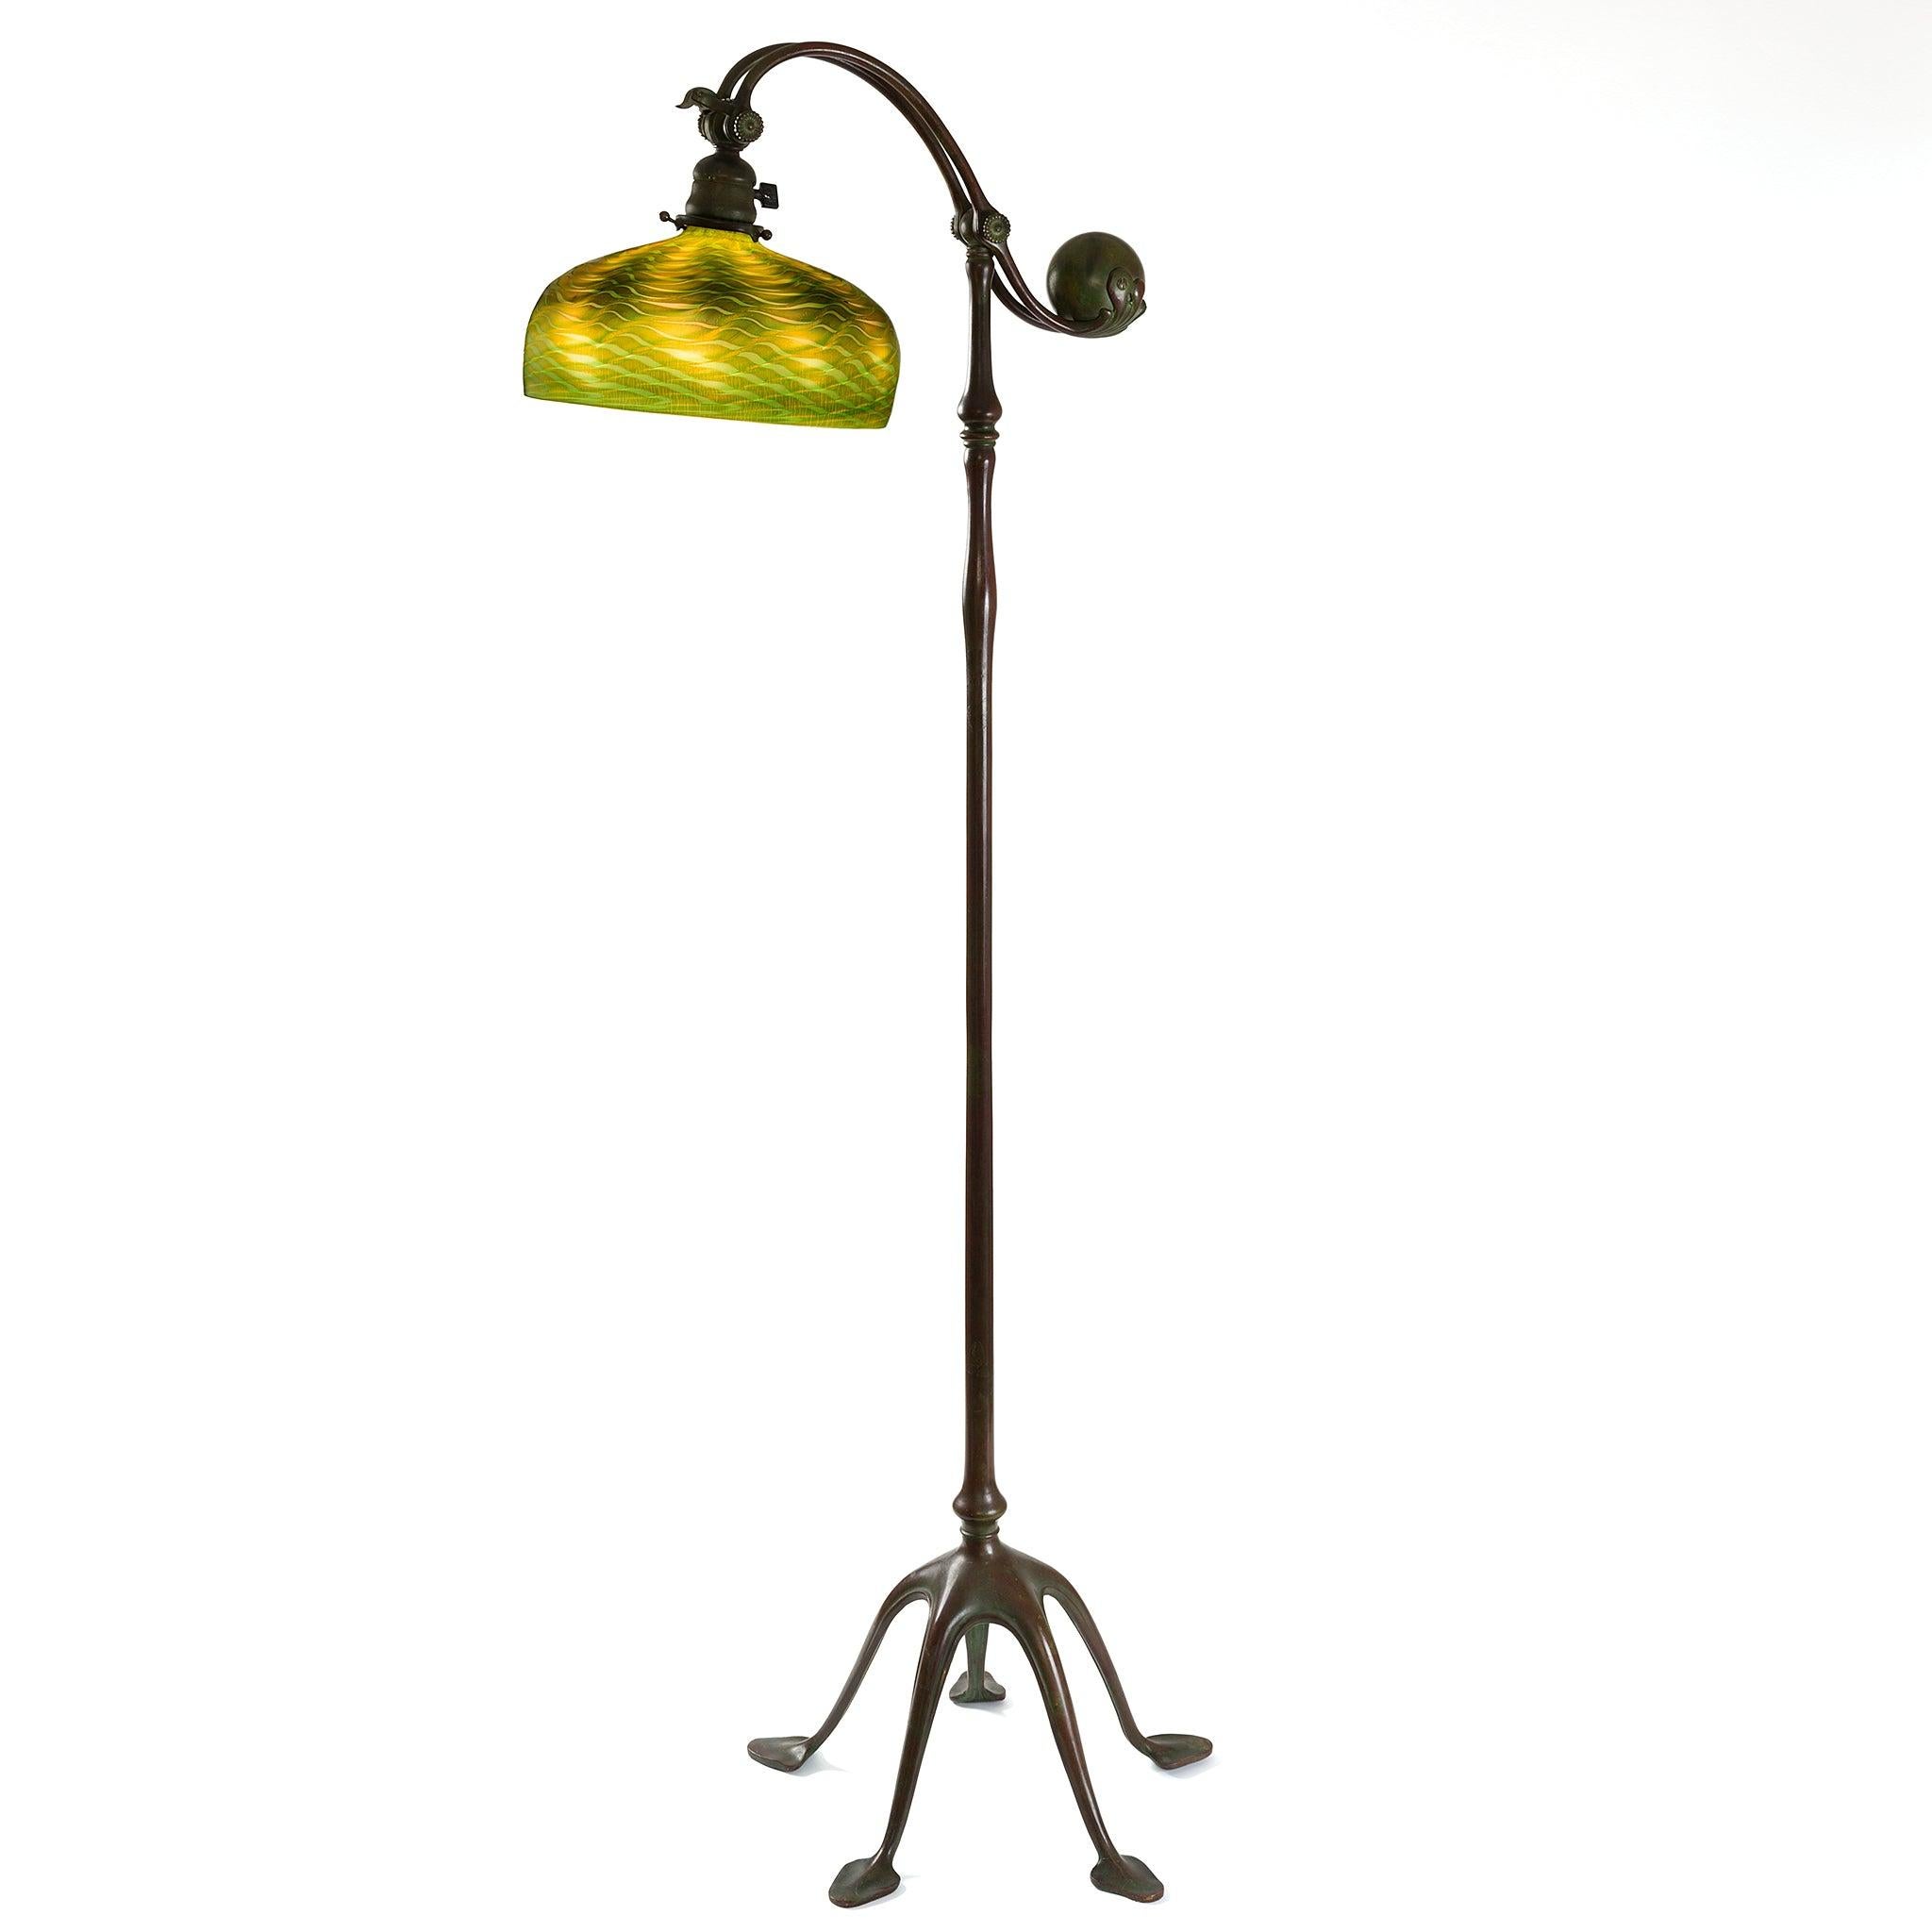 This Tiffany Studios “Counter Balance” floor lamp features a green and gold iridescent damascene shade, which may be raised or lowered, and five-footed patinated bronze base. The green and gold damascene domed shade, with an upper band of